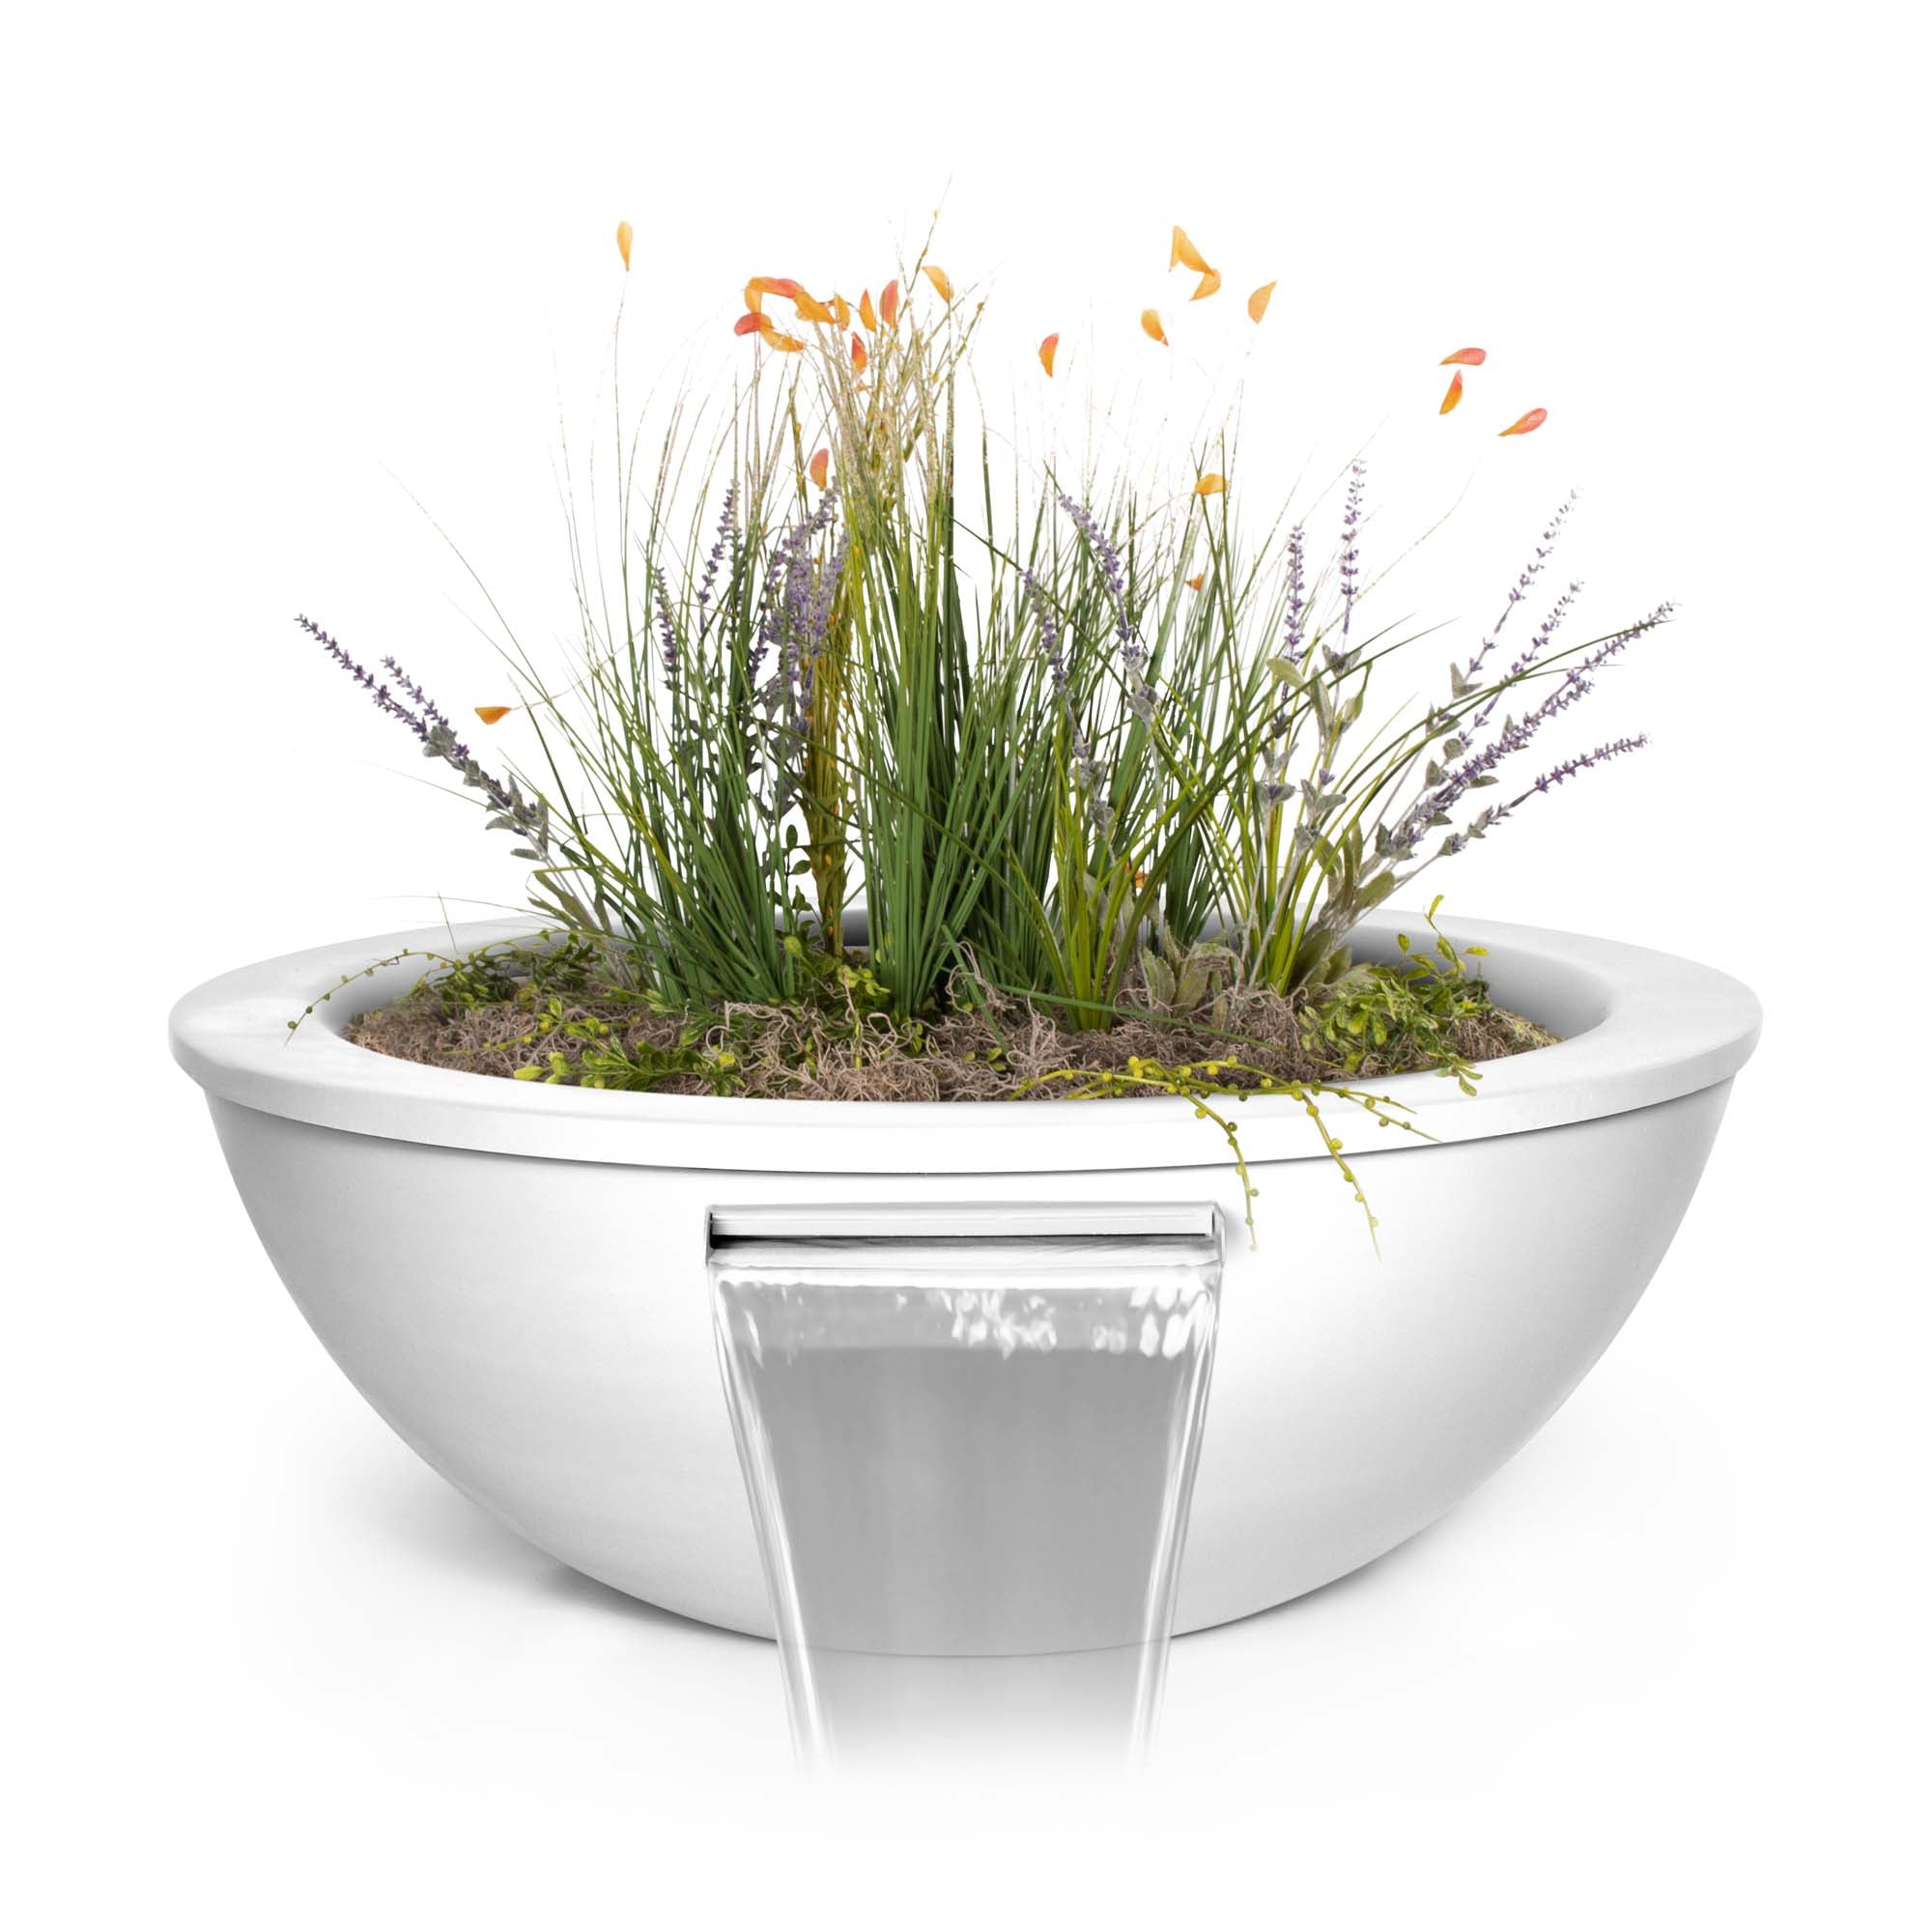 The Outdoor Plus Sedona Planter & Water Bowl Powder Coated Metal OPT-XXRPCPW - Serenity Provision